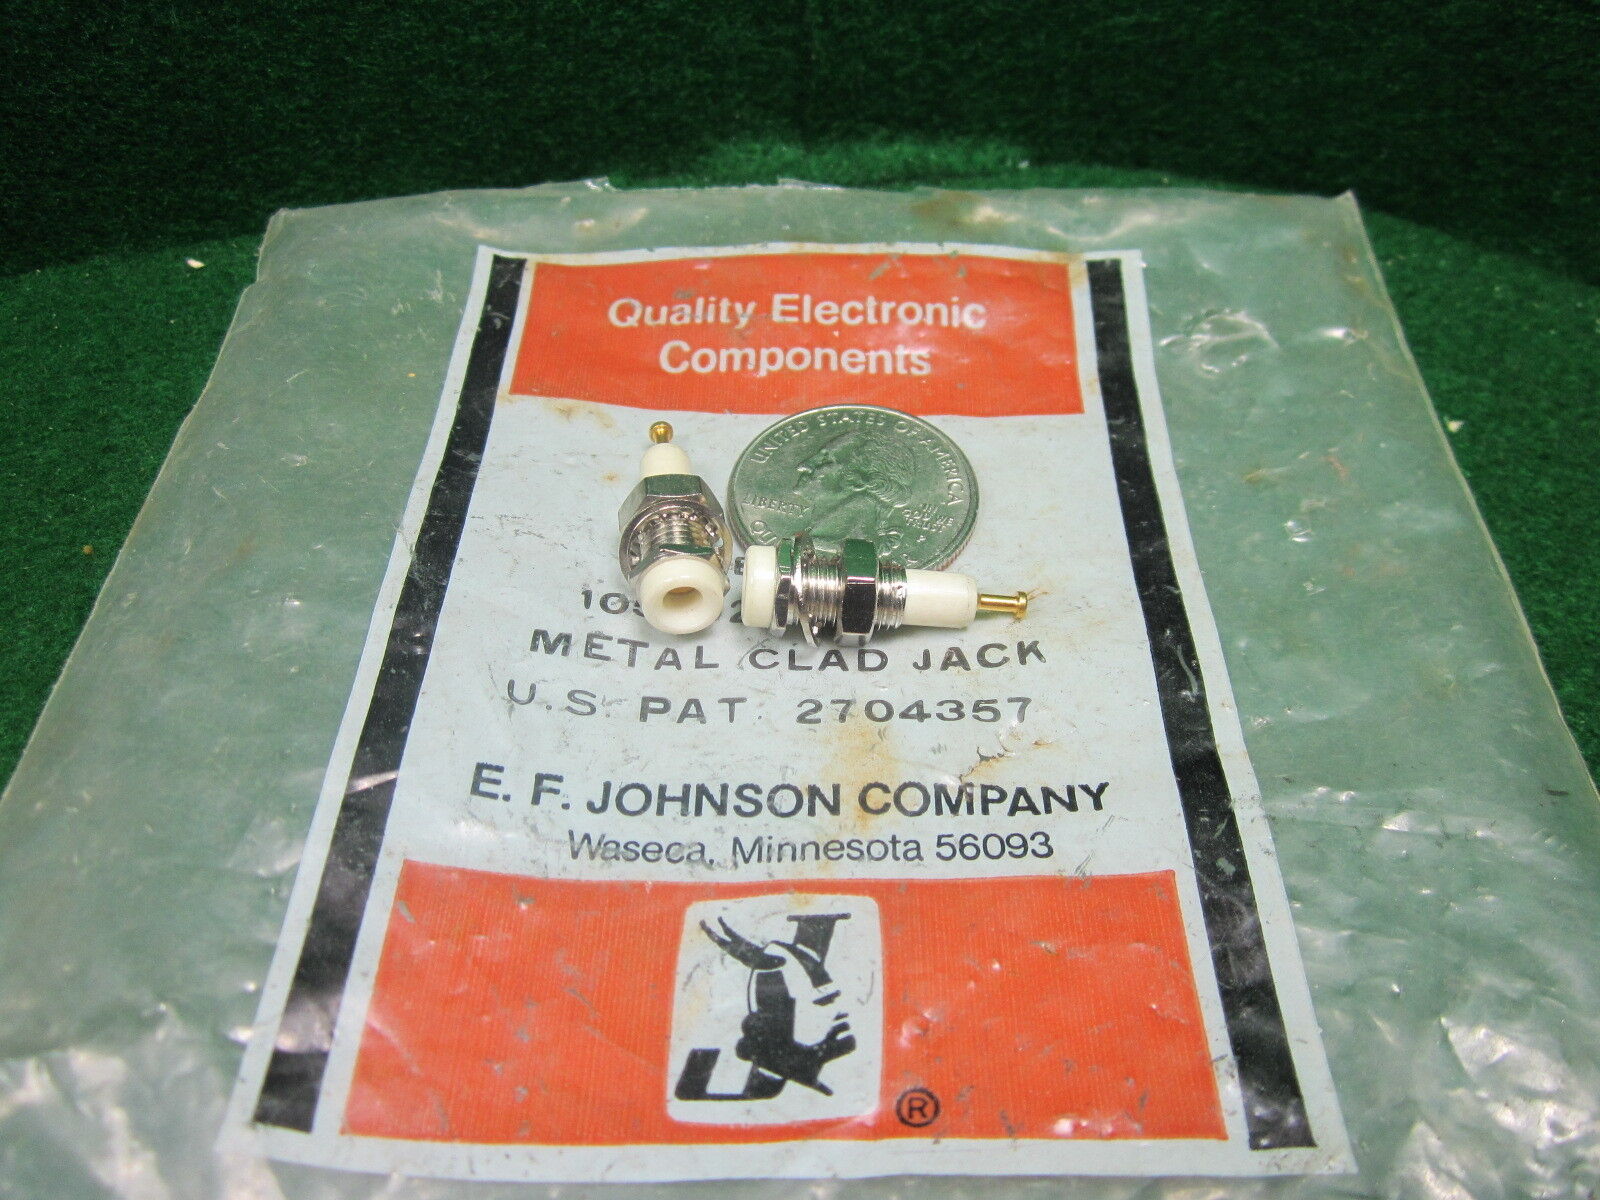 1 Tip Jack Test Point White Gold Plated EF Johnson 105-0201-200 NOS High Quality